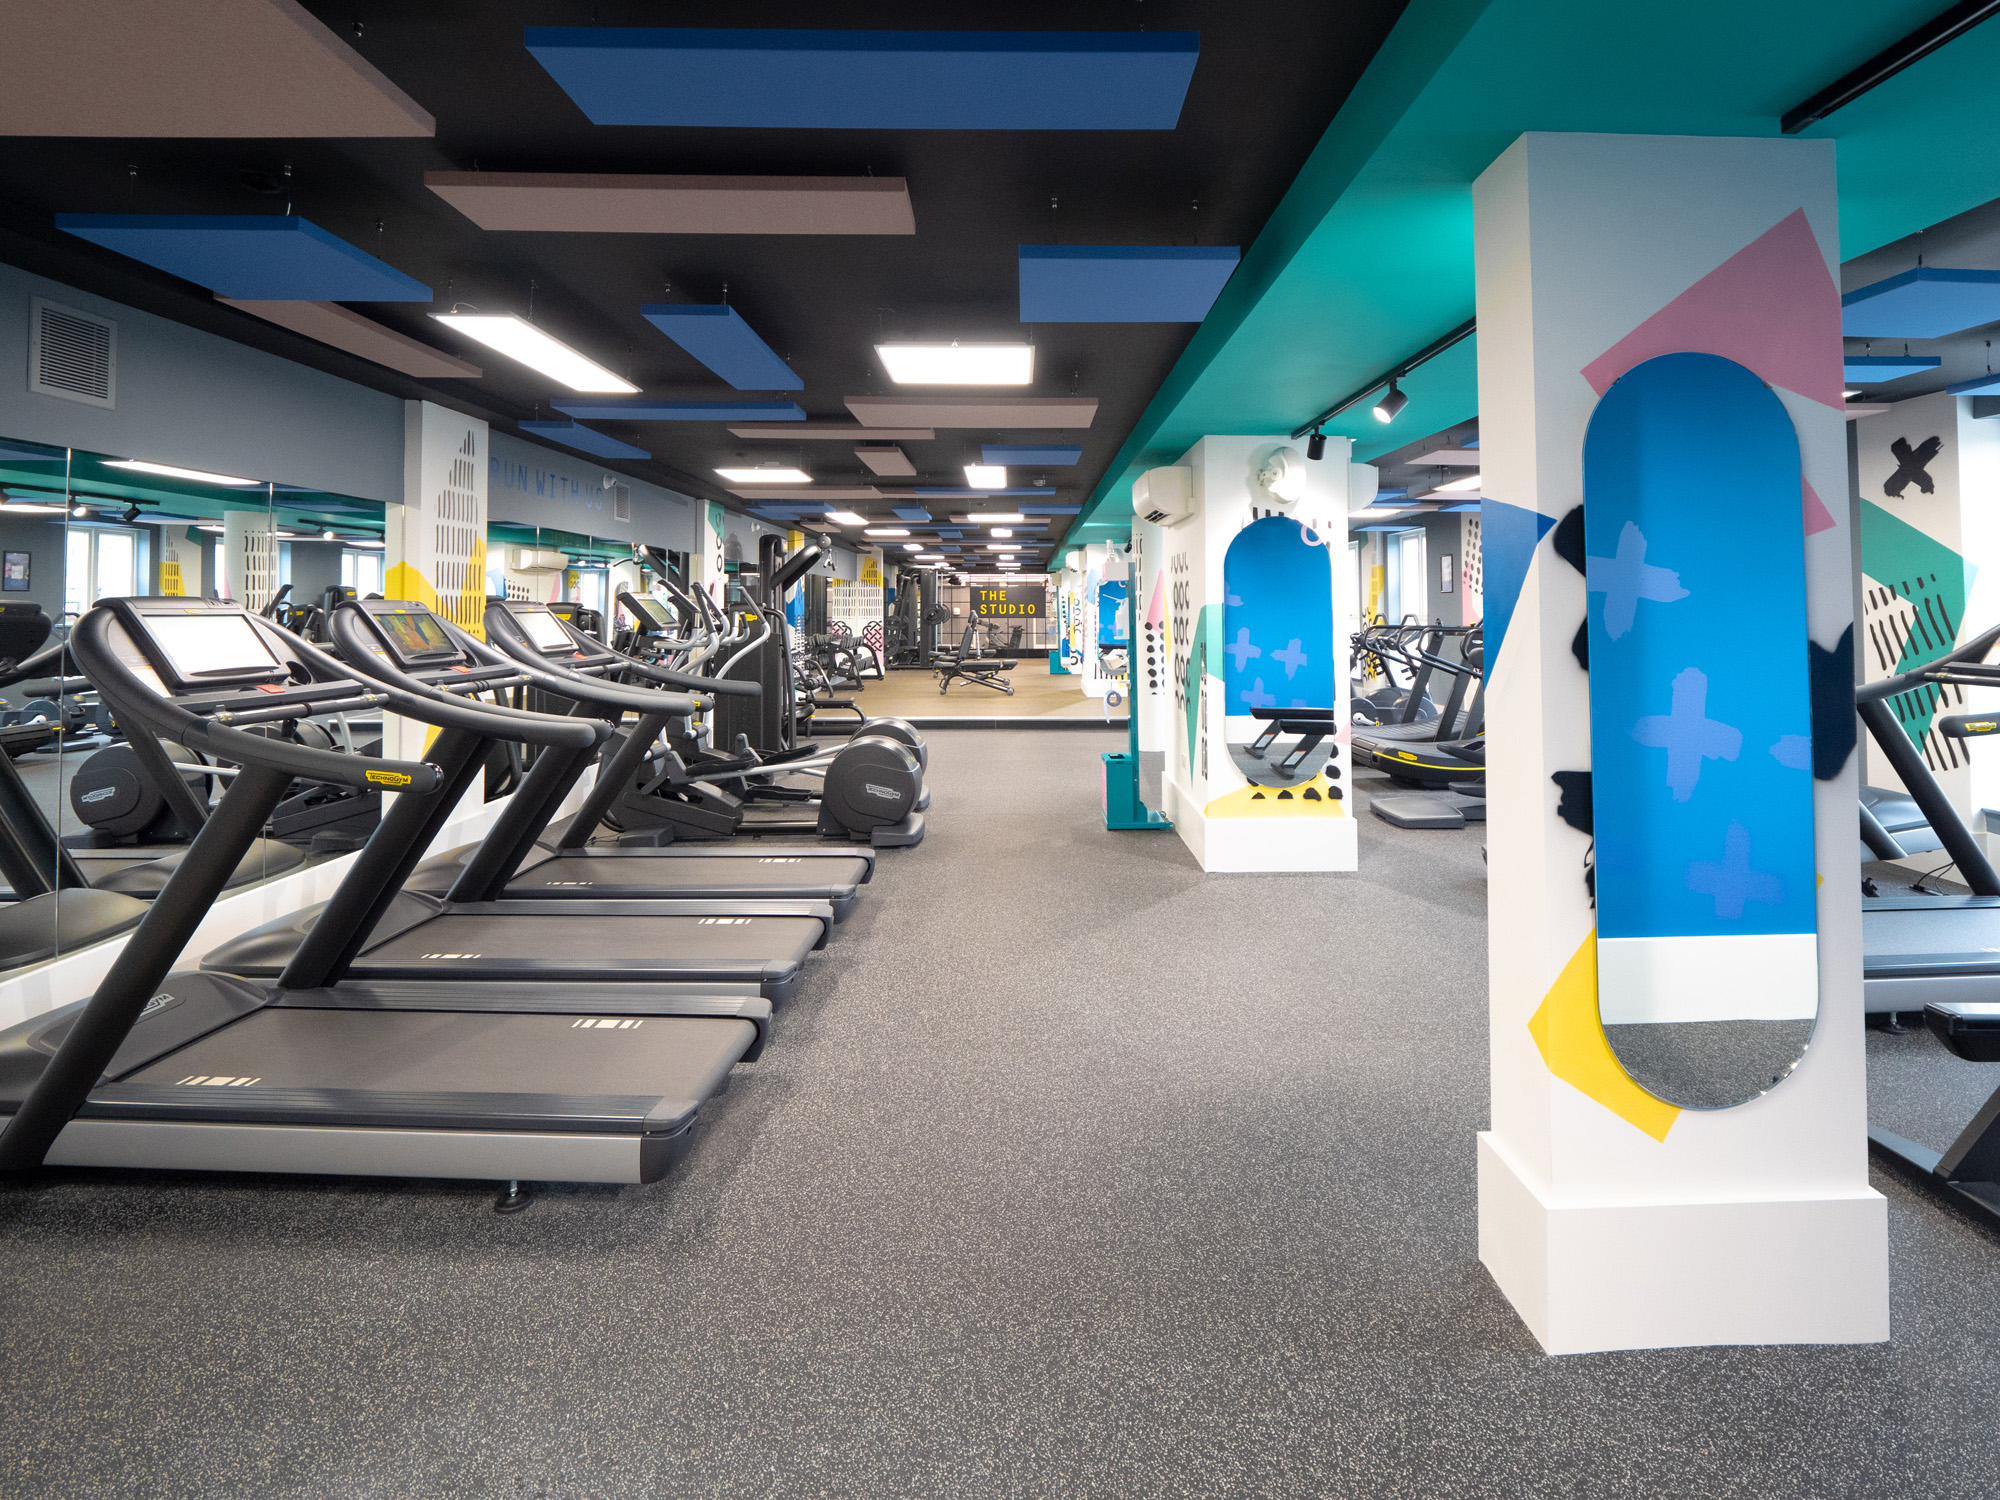 Bright coloured gym with cardio and weight lifting equipment